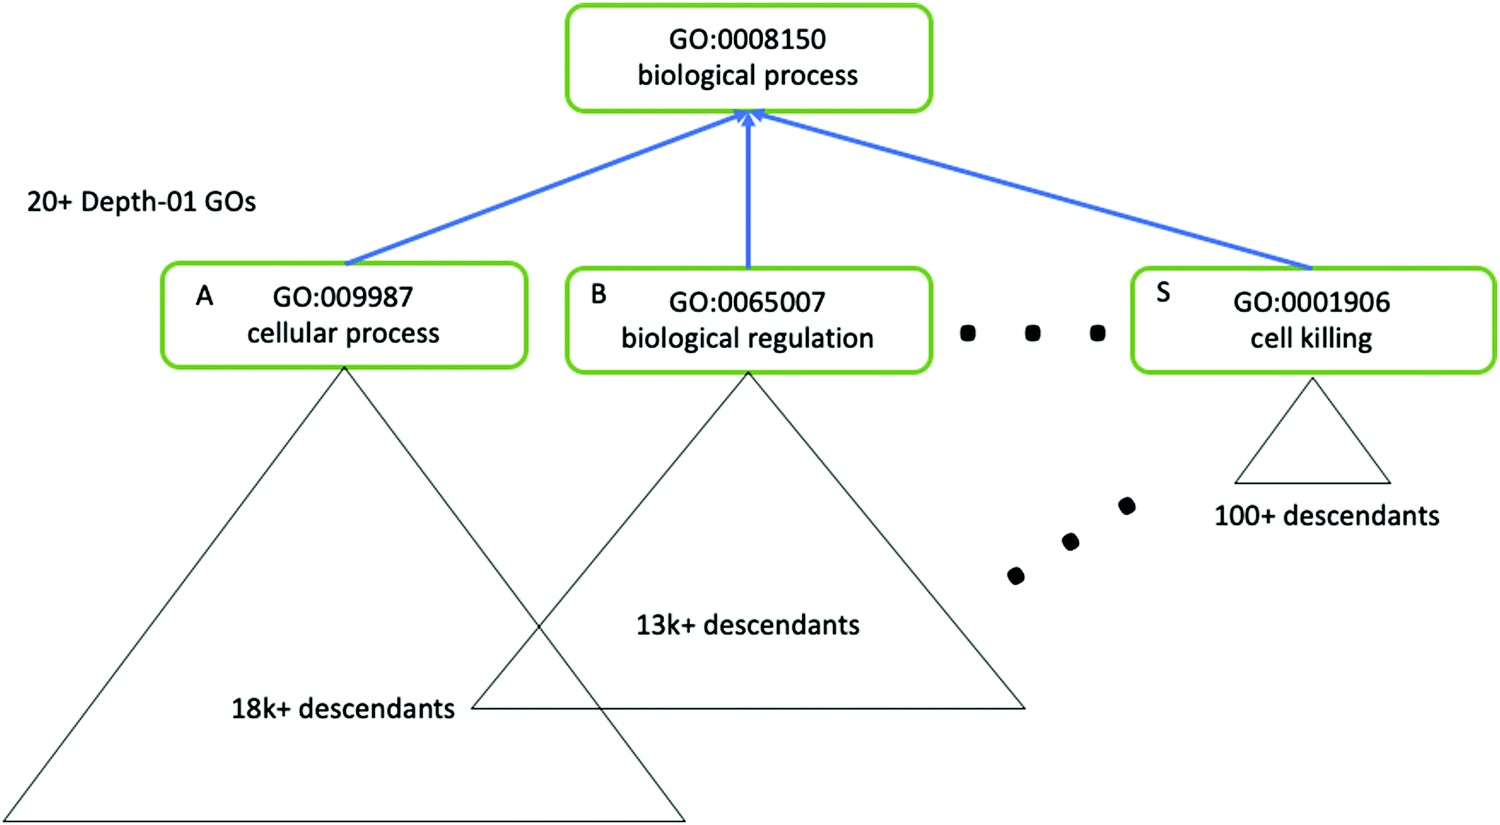 Overview of the prediction method for SMB gene clusters. (a